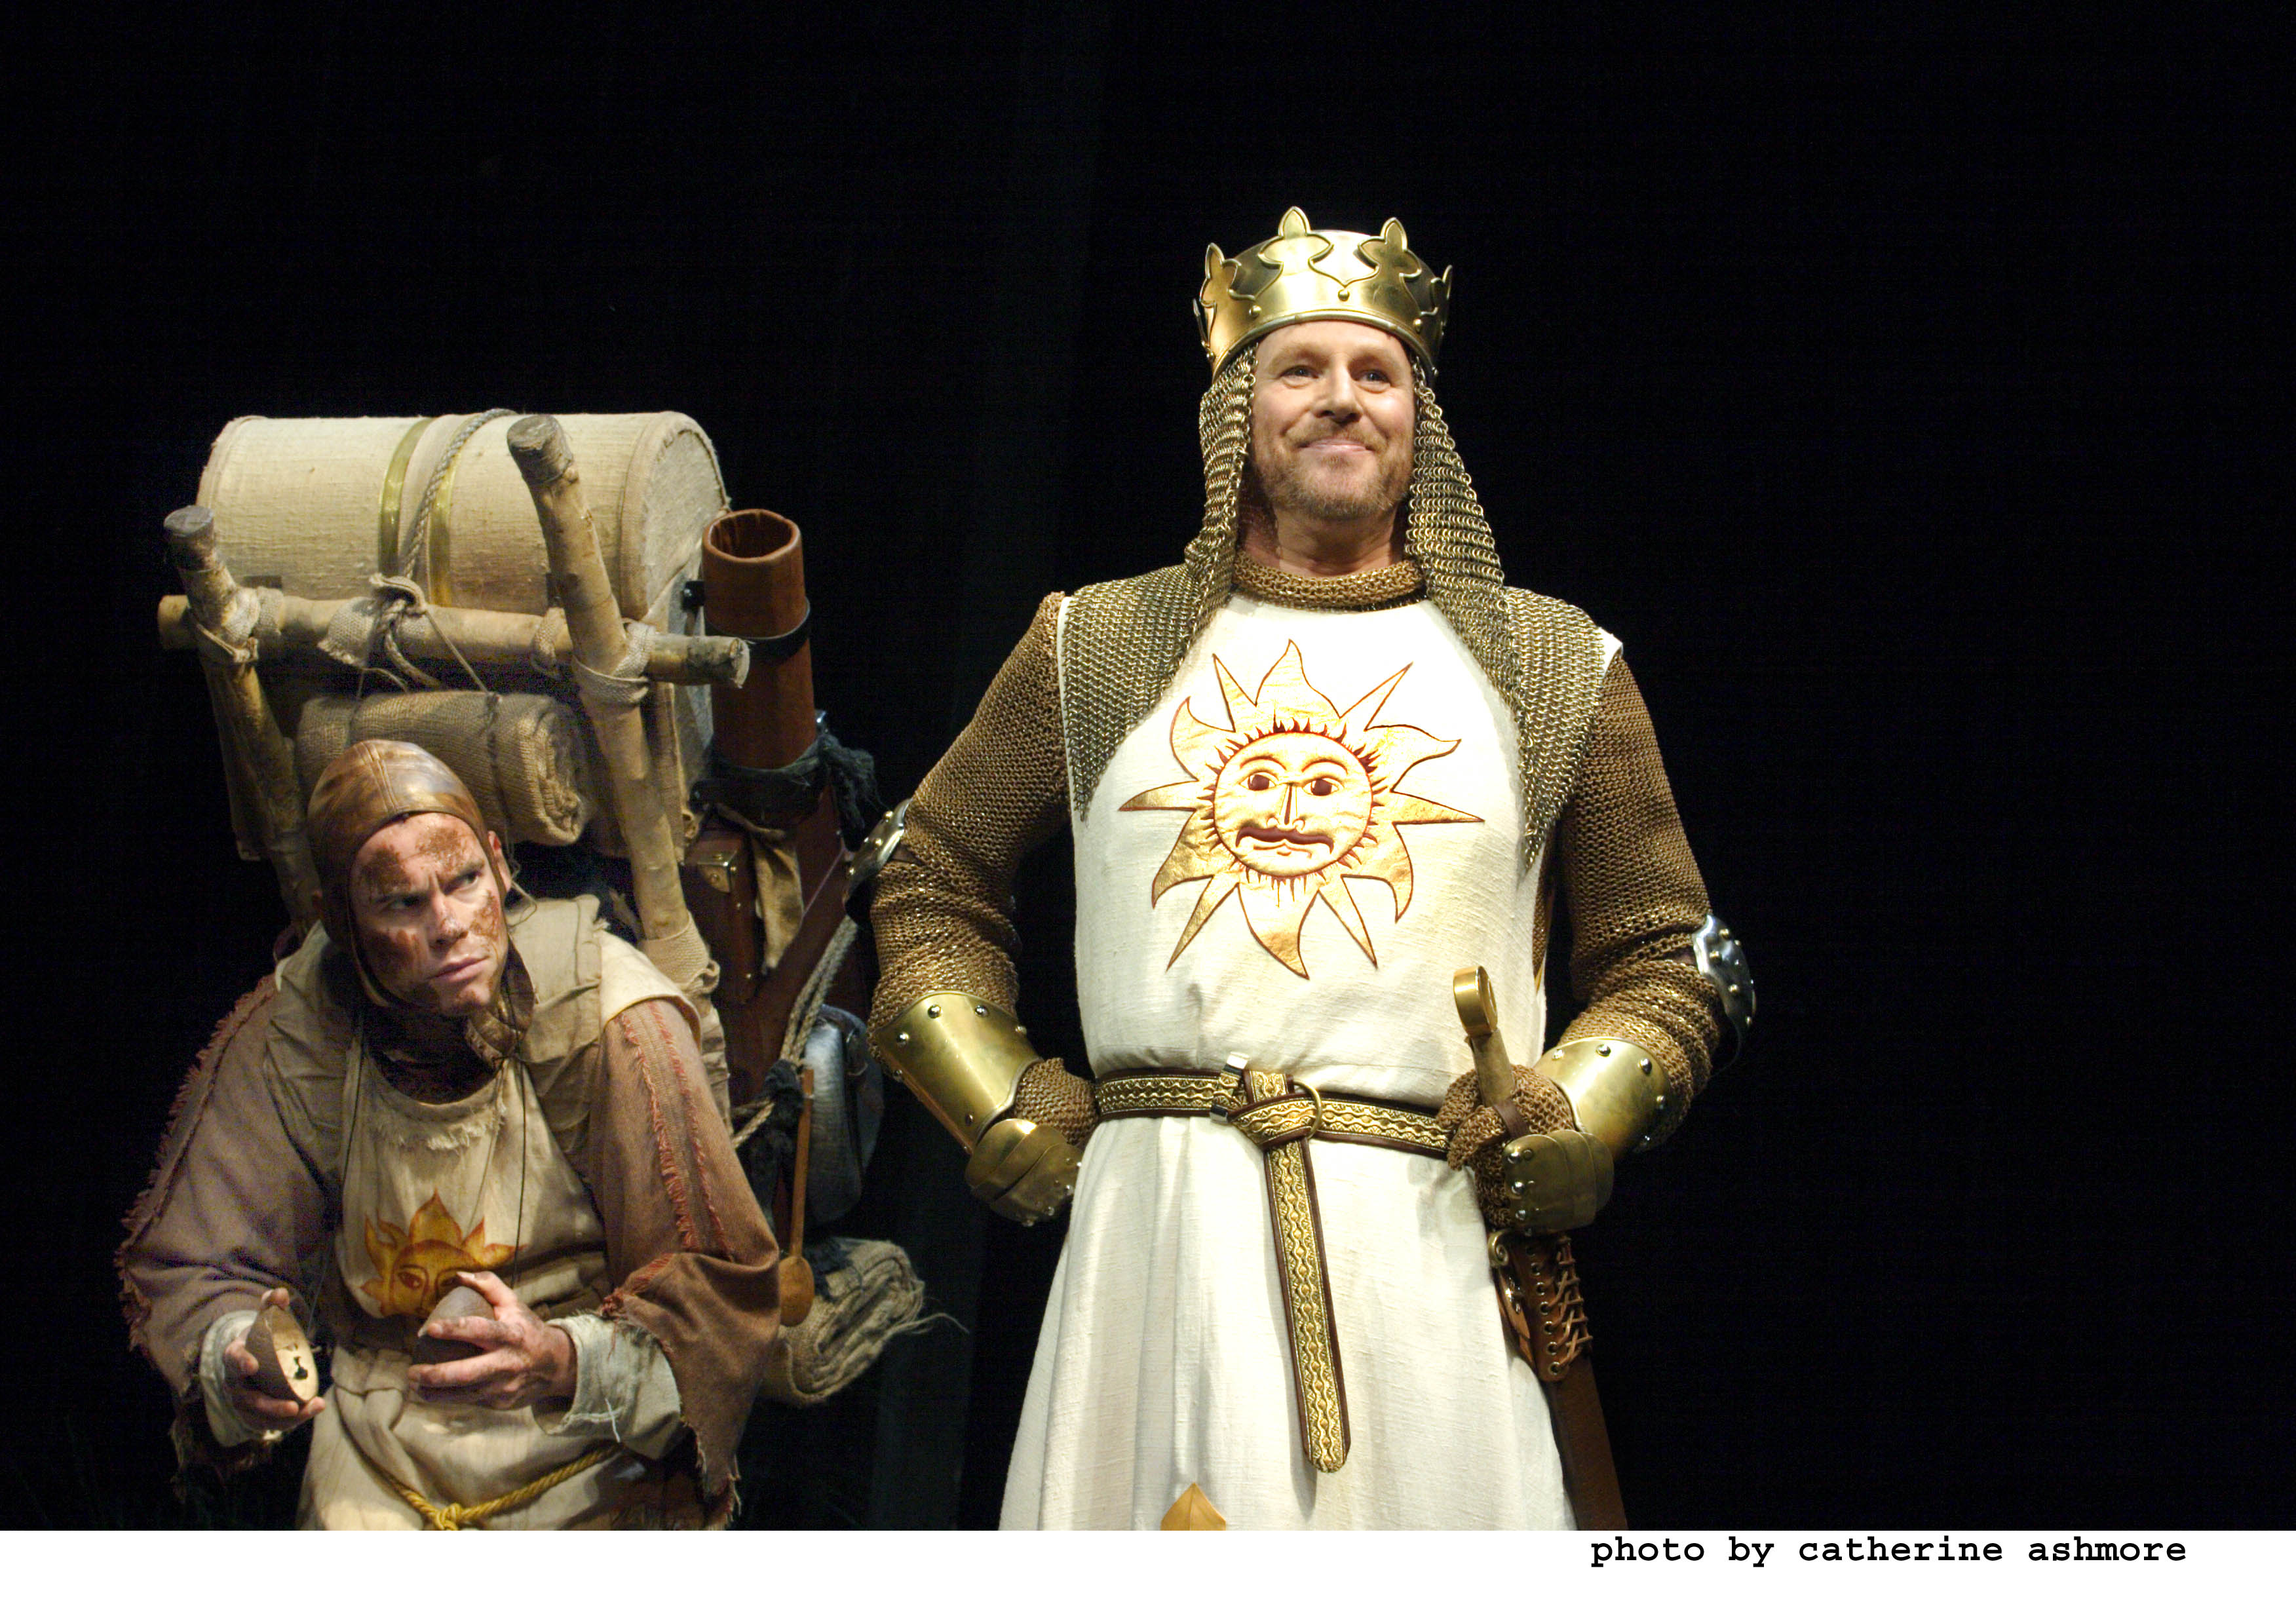 Monty Python's Spamalot - Friday matinee tickets - kids 5 to 15 pay th...